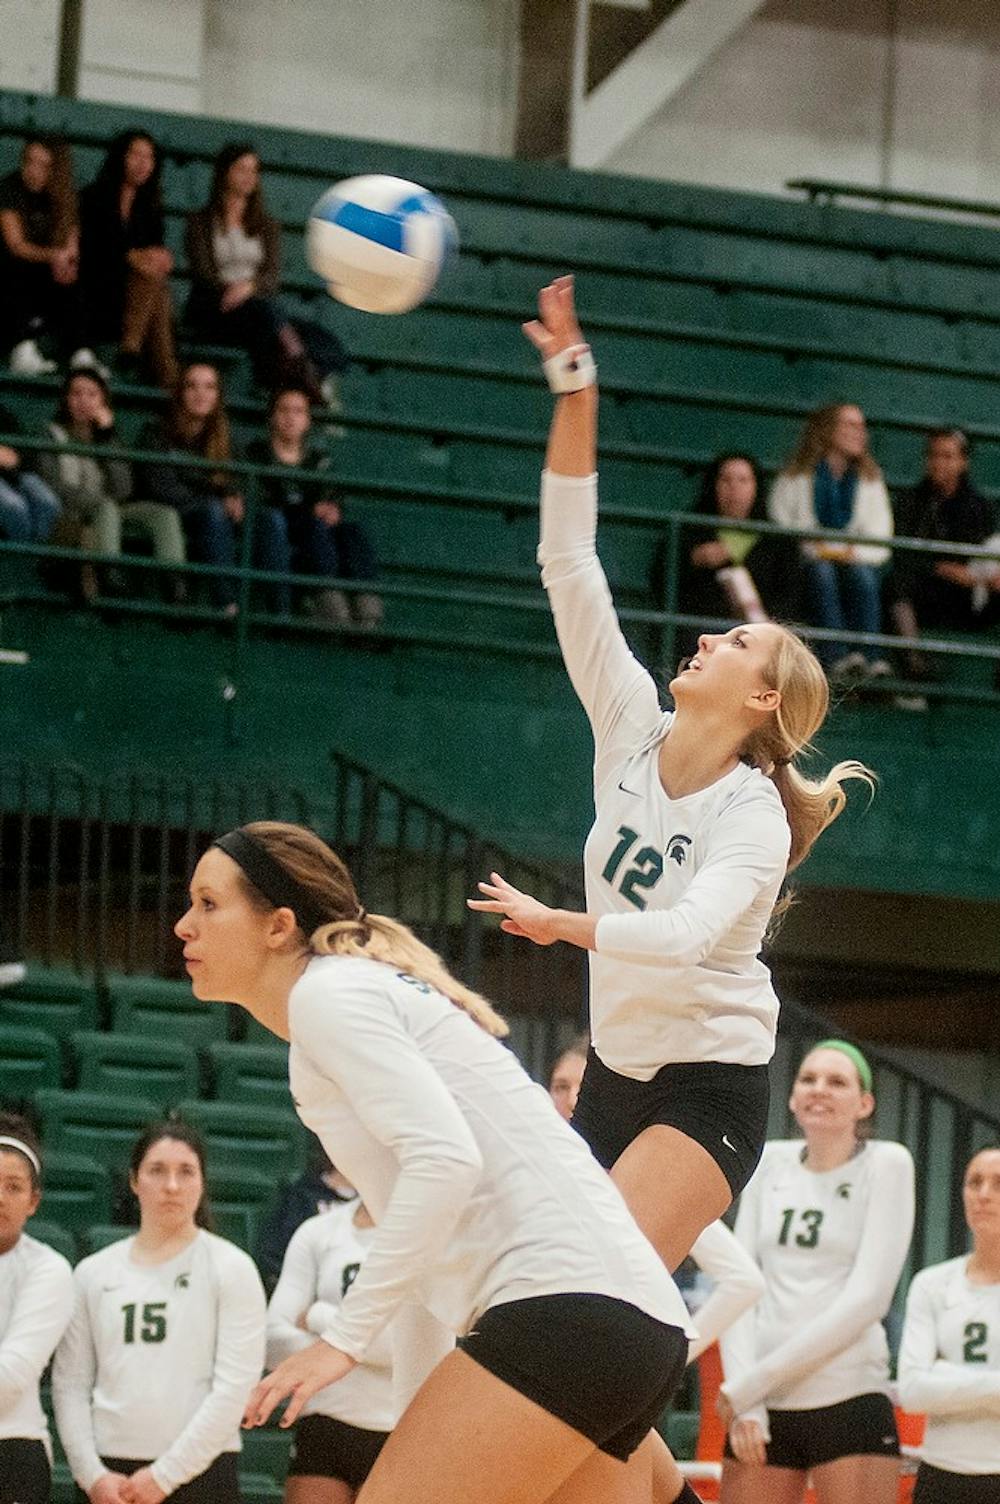 <p>Freshman setter Rachel Minarick spikes the ball while senior outside hitter Taylor Galloway holds her position for the return Nov. 15, 2014, during the game against Indiana University at Jenison Field House. The Spartans defeated the Hoosiers, 3-0. Raymond Williams/The State News</p>